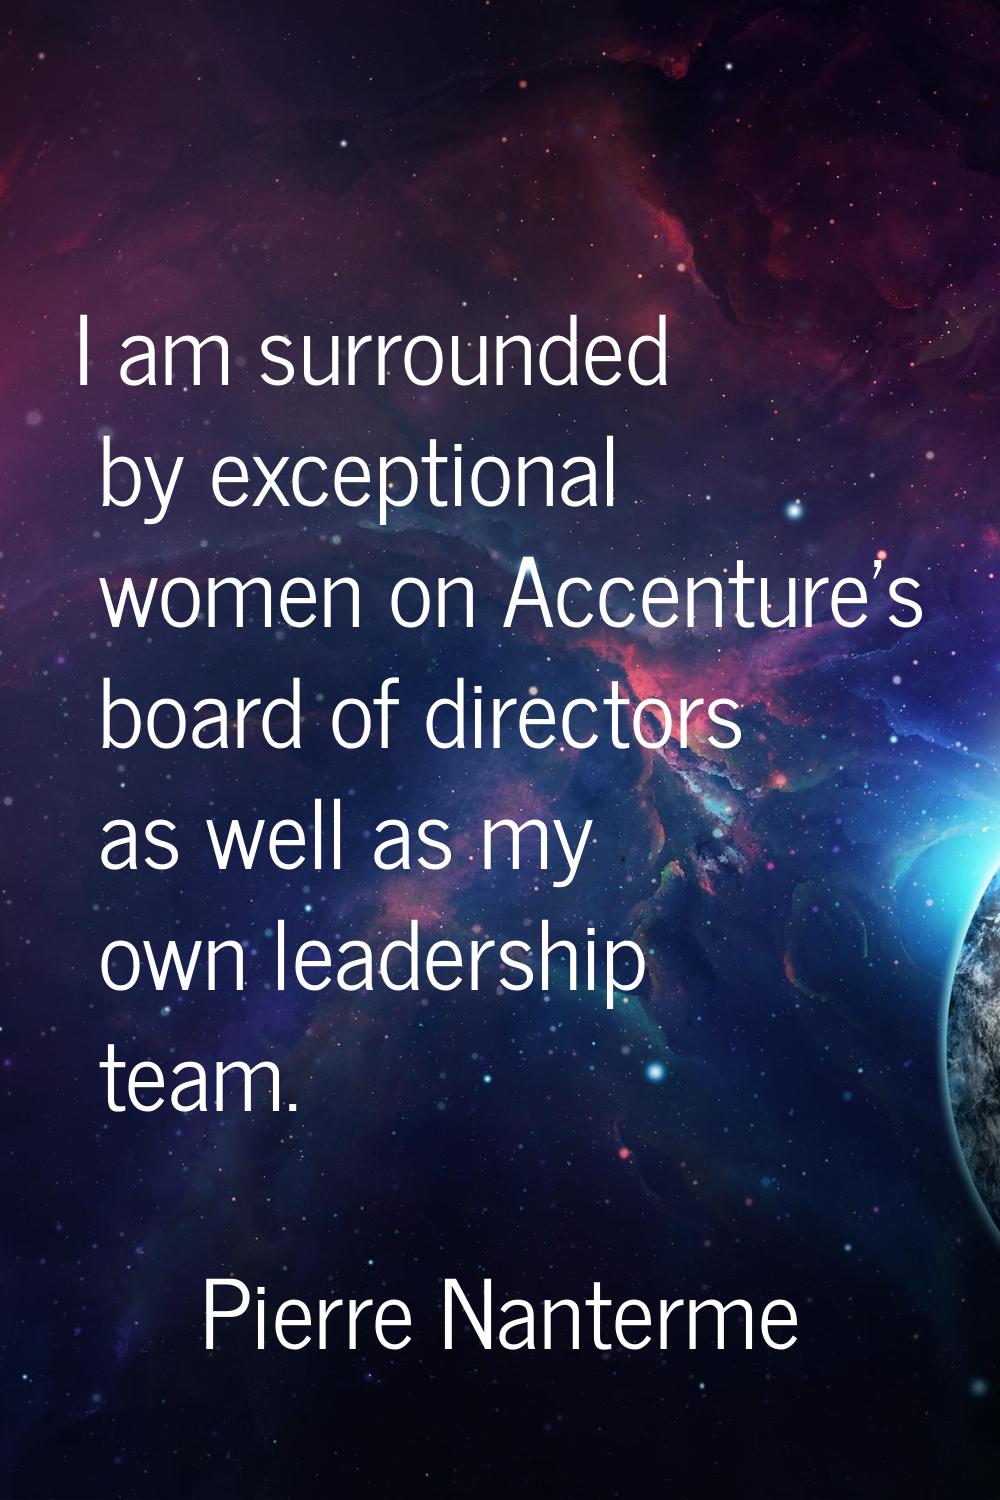 I am surrounded by exceptional women on Accenture's board of directors as well as my own leadership